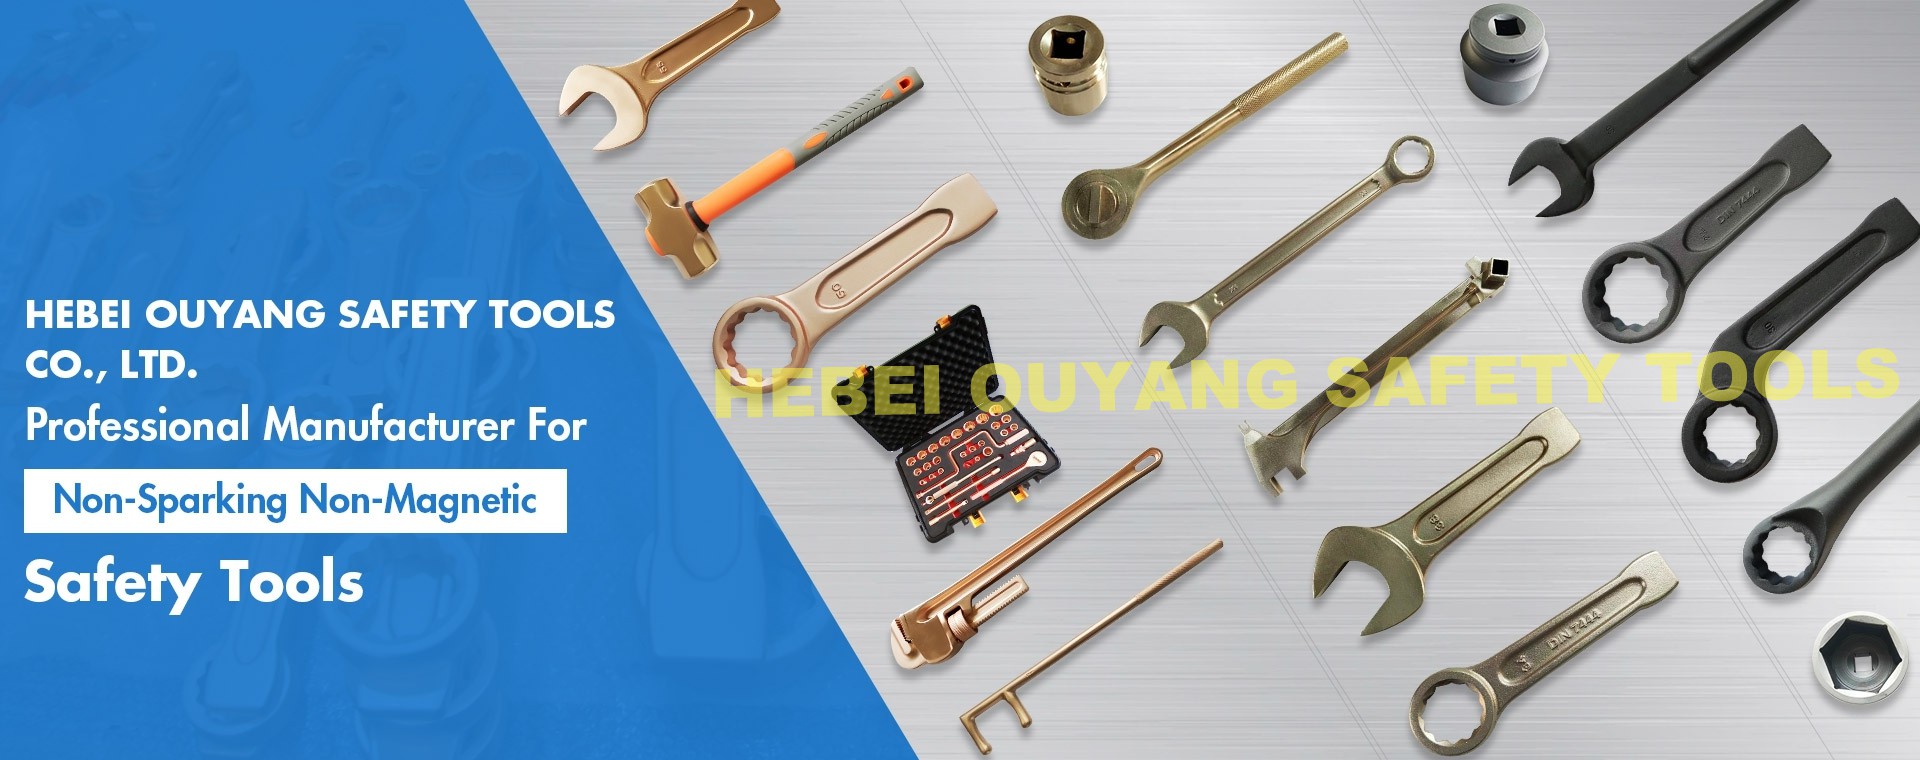 HEBEI OUYANG SAFETY TOOLS CO.,LTD